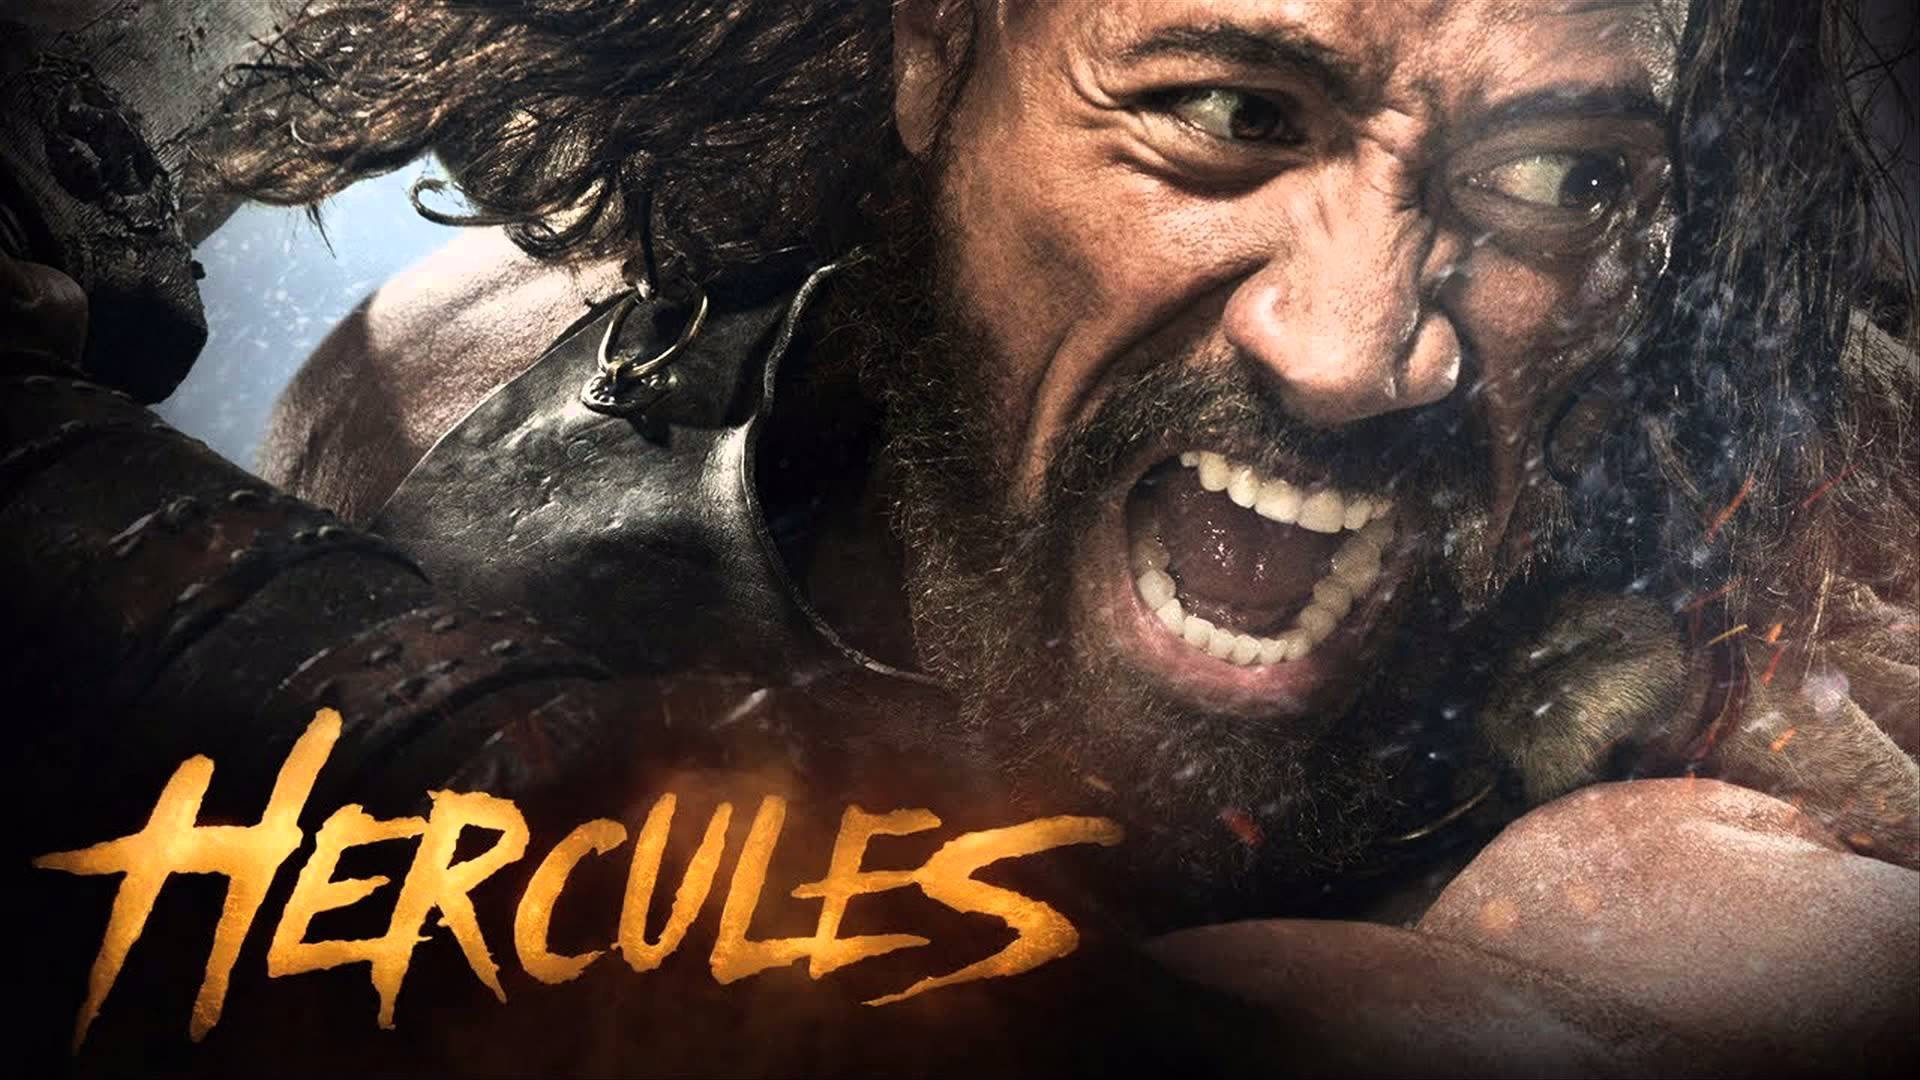 Hercules Movie Poster With Dwayne